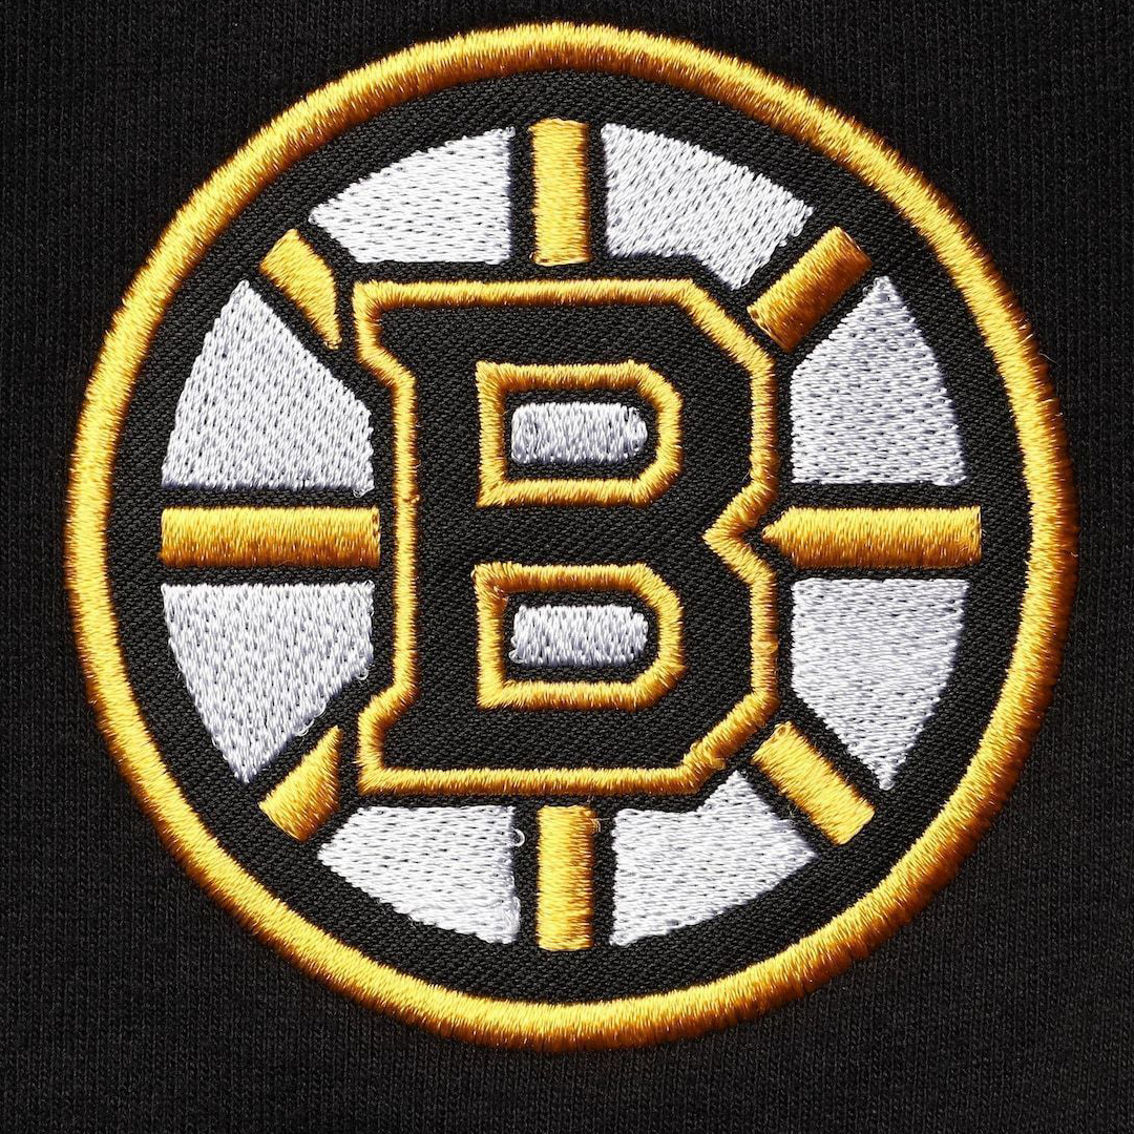 Profile Men's Black Boston Bruins Big & Tall French Terry Shorts - Image 3 of 4